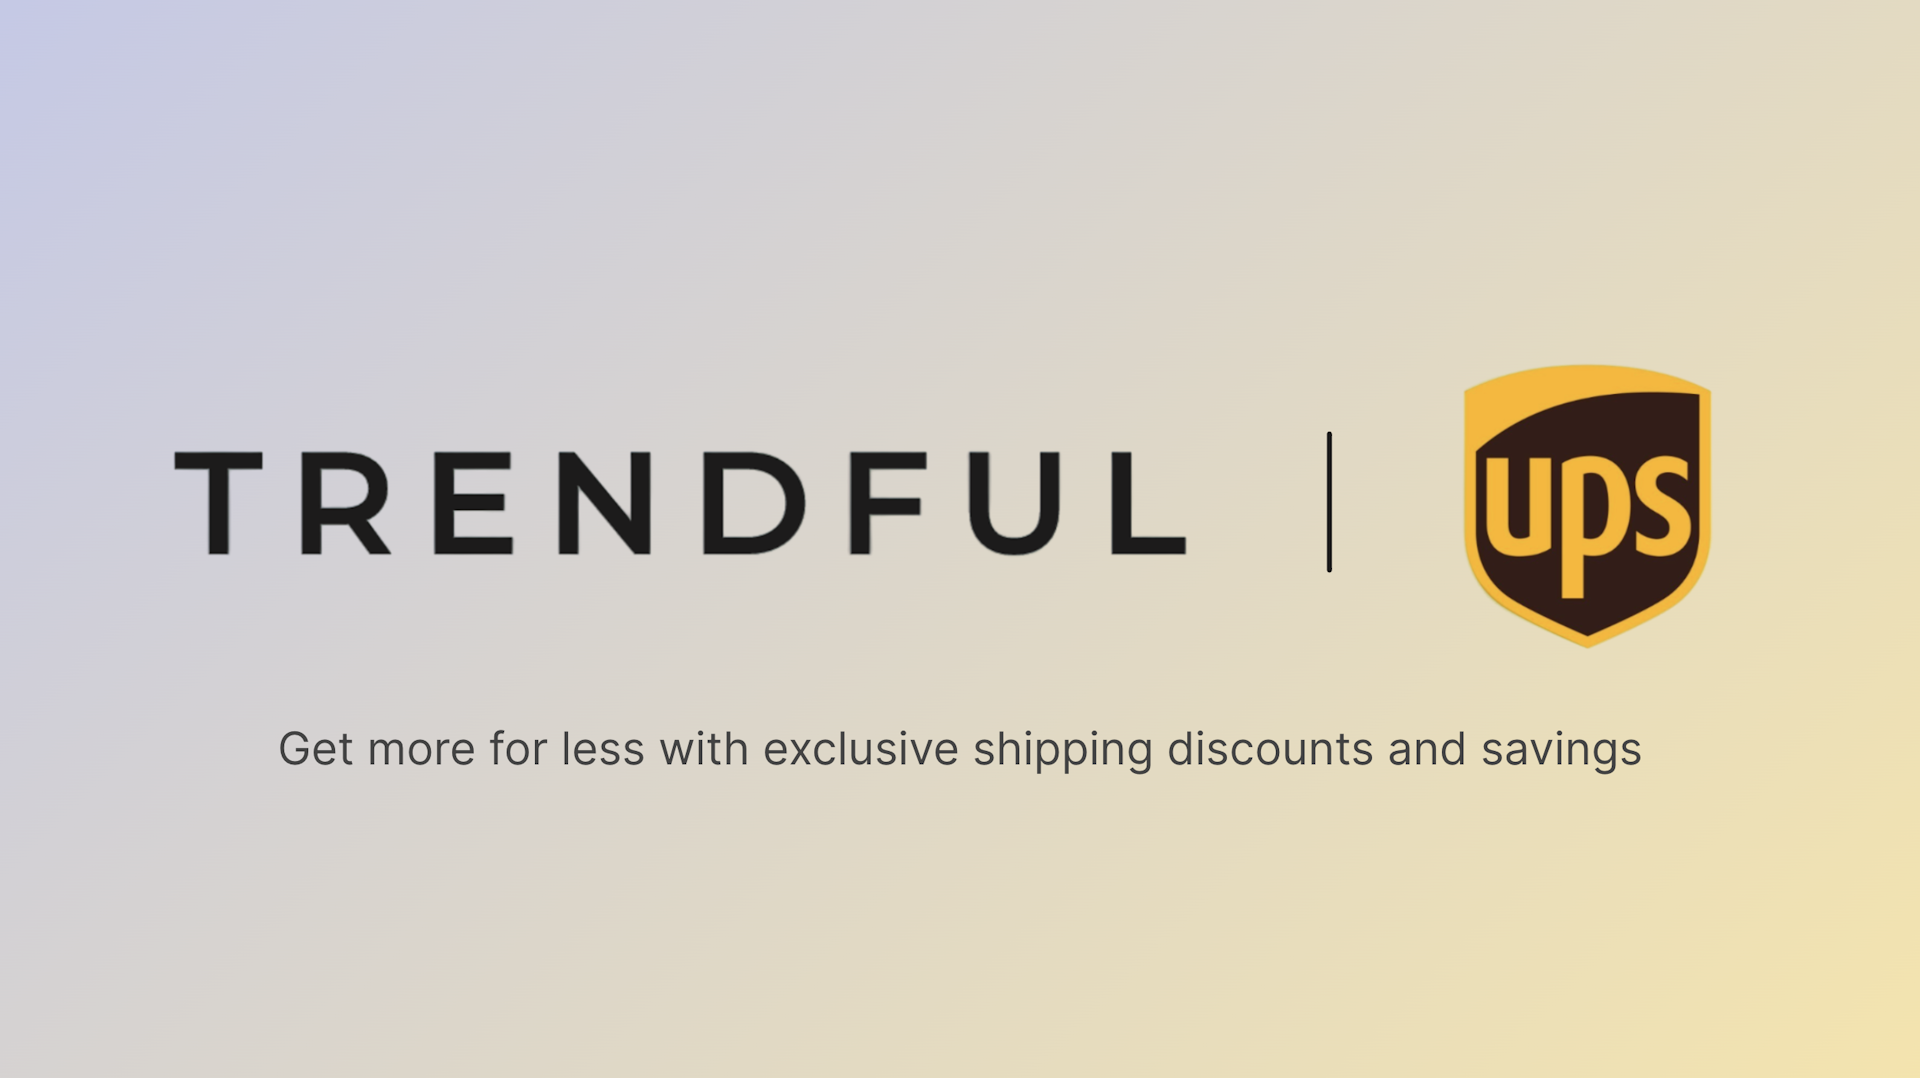 Scale Your Resale Business with Trendful’s Exclusive UPS Shipping Discounts